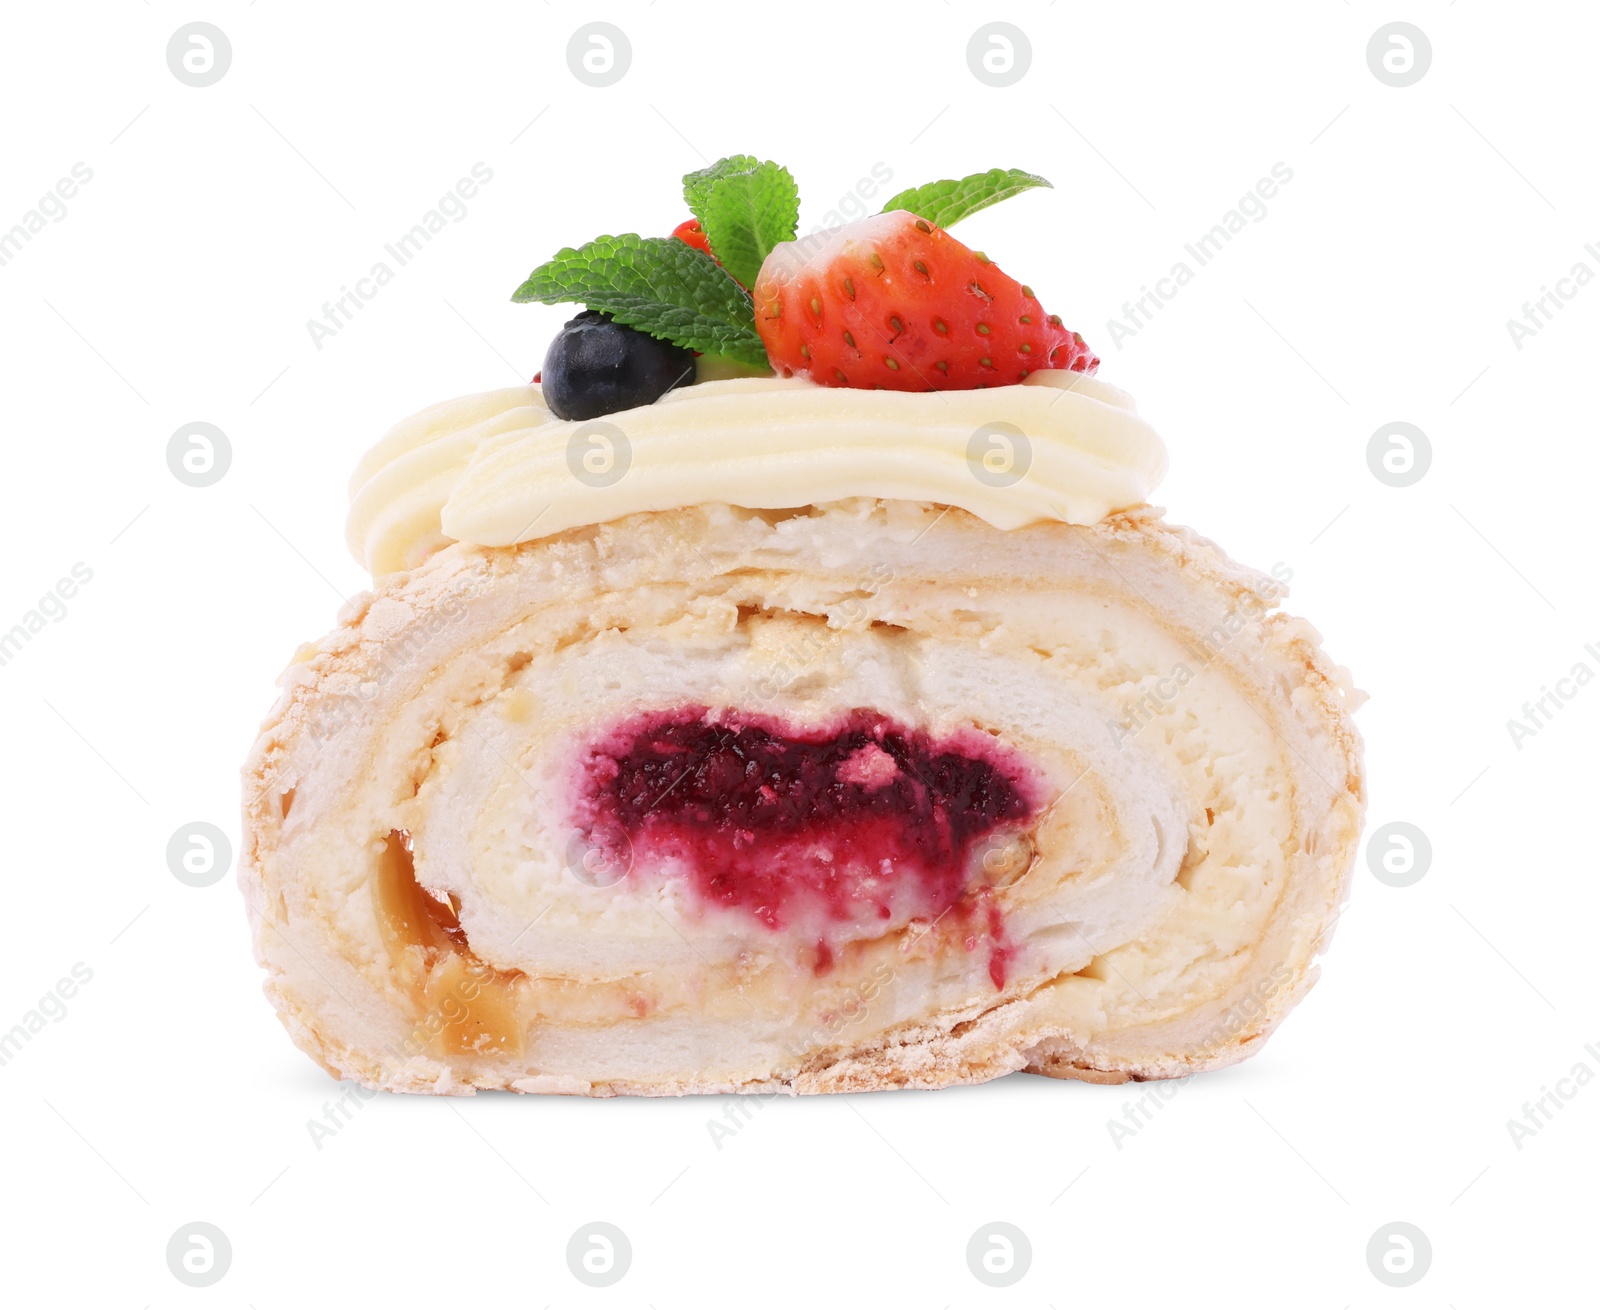 Photo of Slice of tasty meringue roll with jam, berries and mint leaves isolated on white